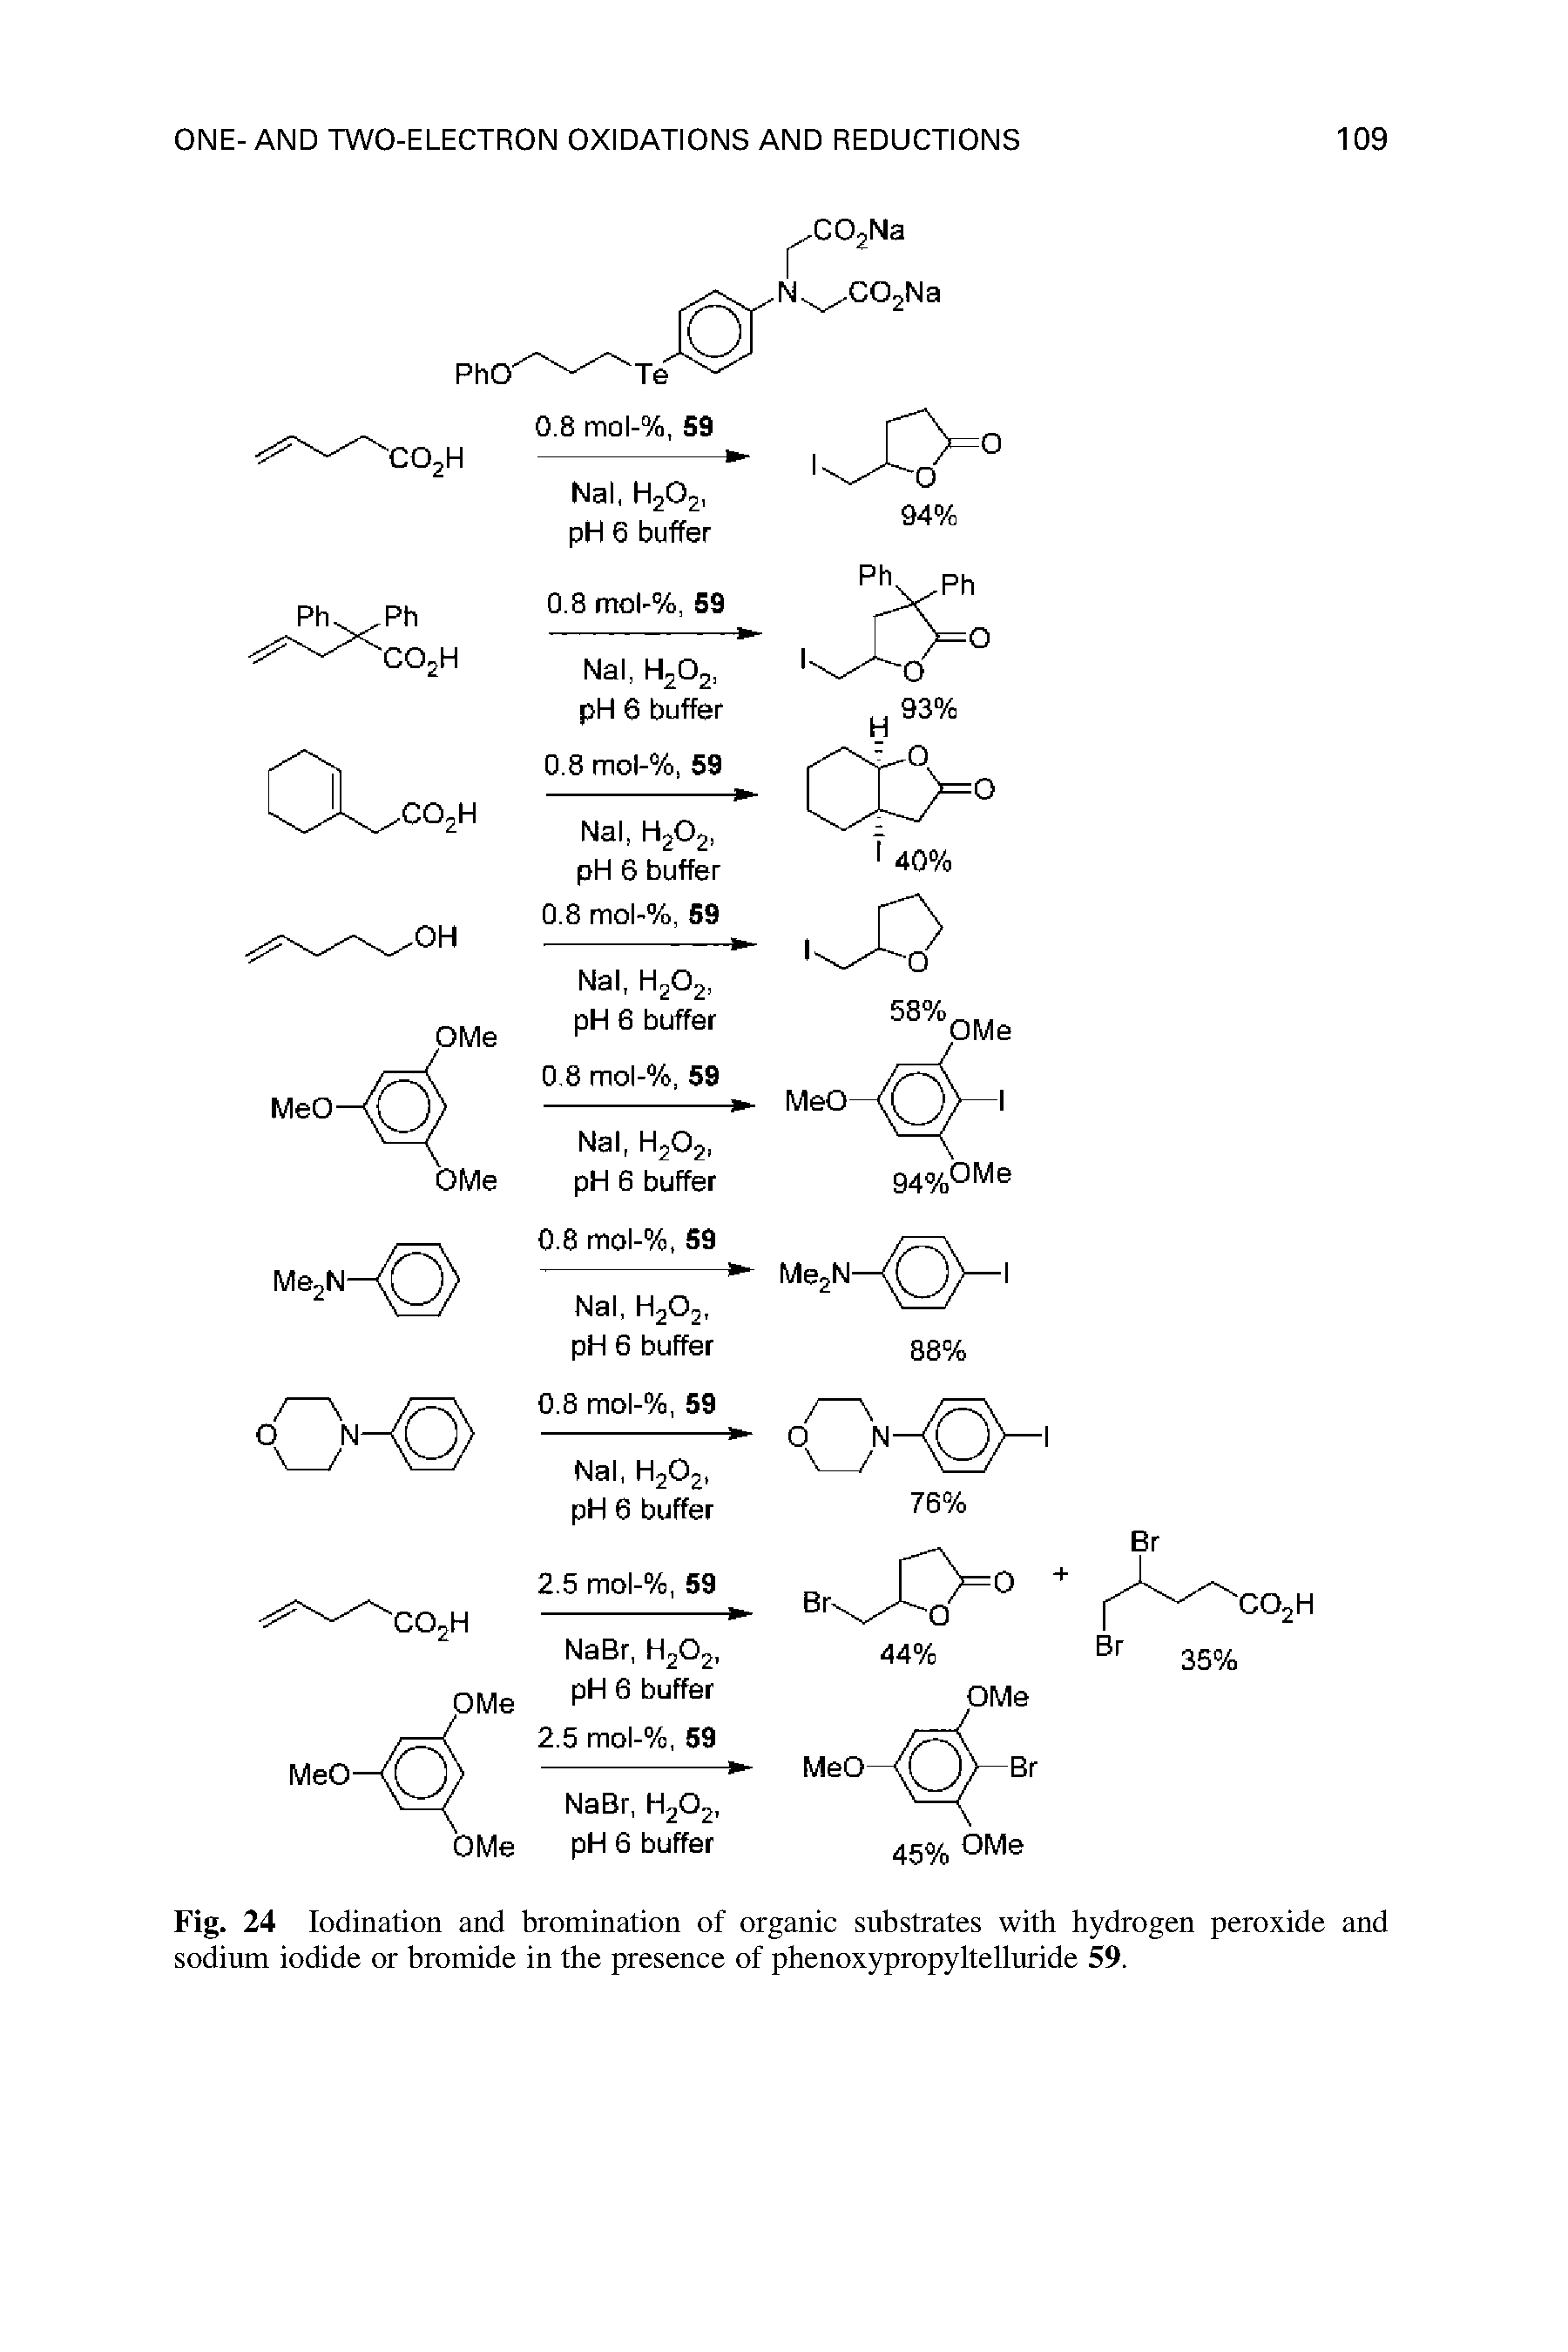 Fig. 24 Iodination and bromination of organic substrates with hydrogen peroxide and sodium iodide or bromide in the presence of phenoxypropyltelluride 59.